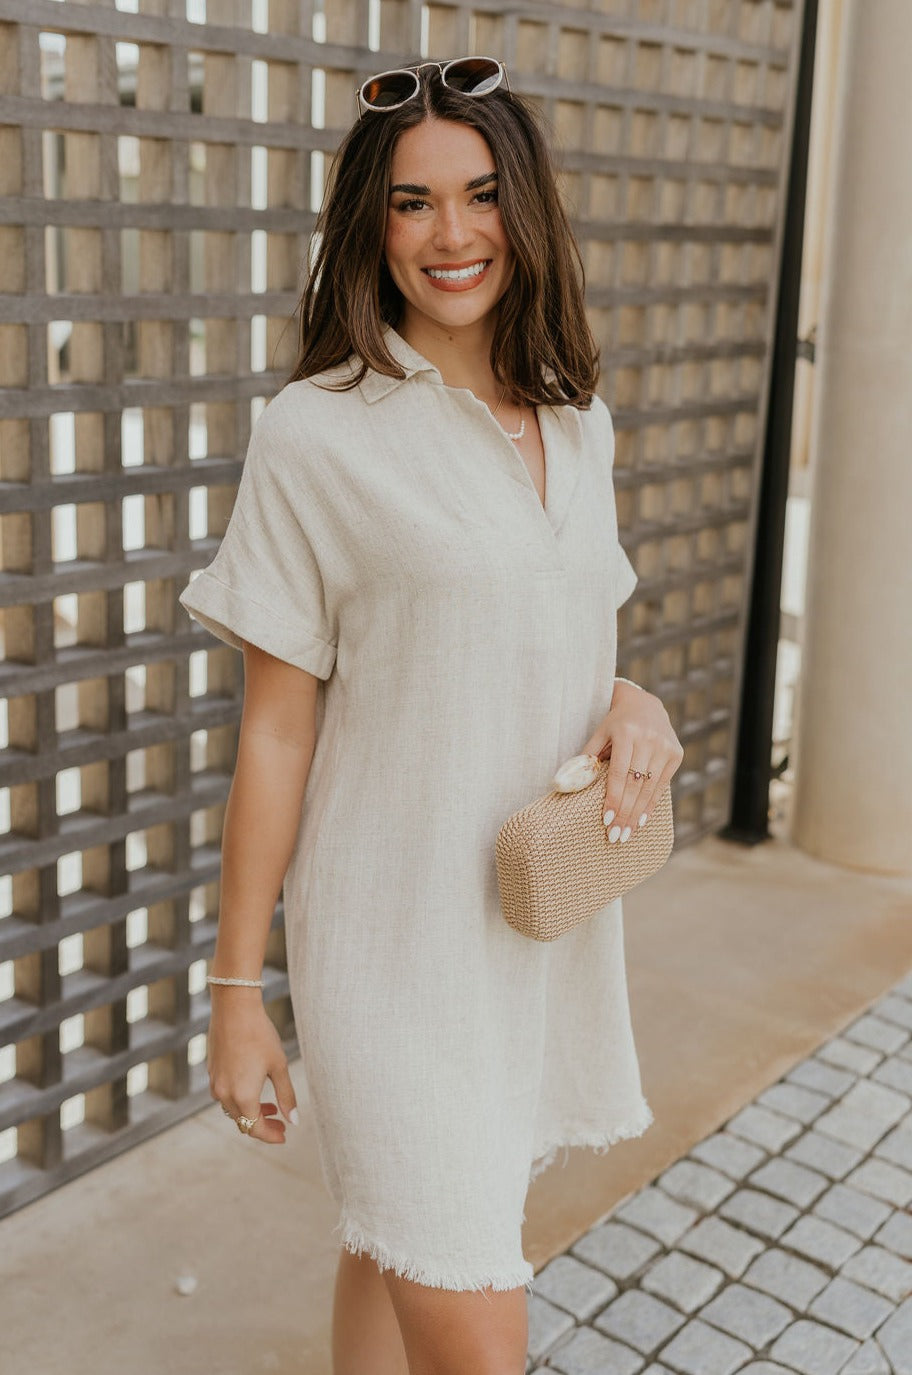 Frontal side view of female model wearing the Juliette Linen Fray Mini Dress which features Linen Lightweight Fabric, Fray Hem Details, V-Neckline with a Collar and Folded Short Sleeves